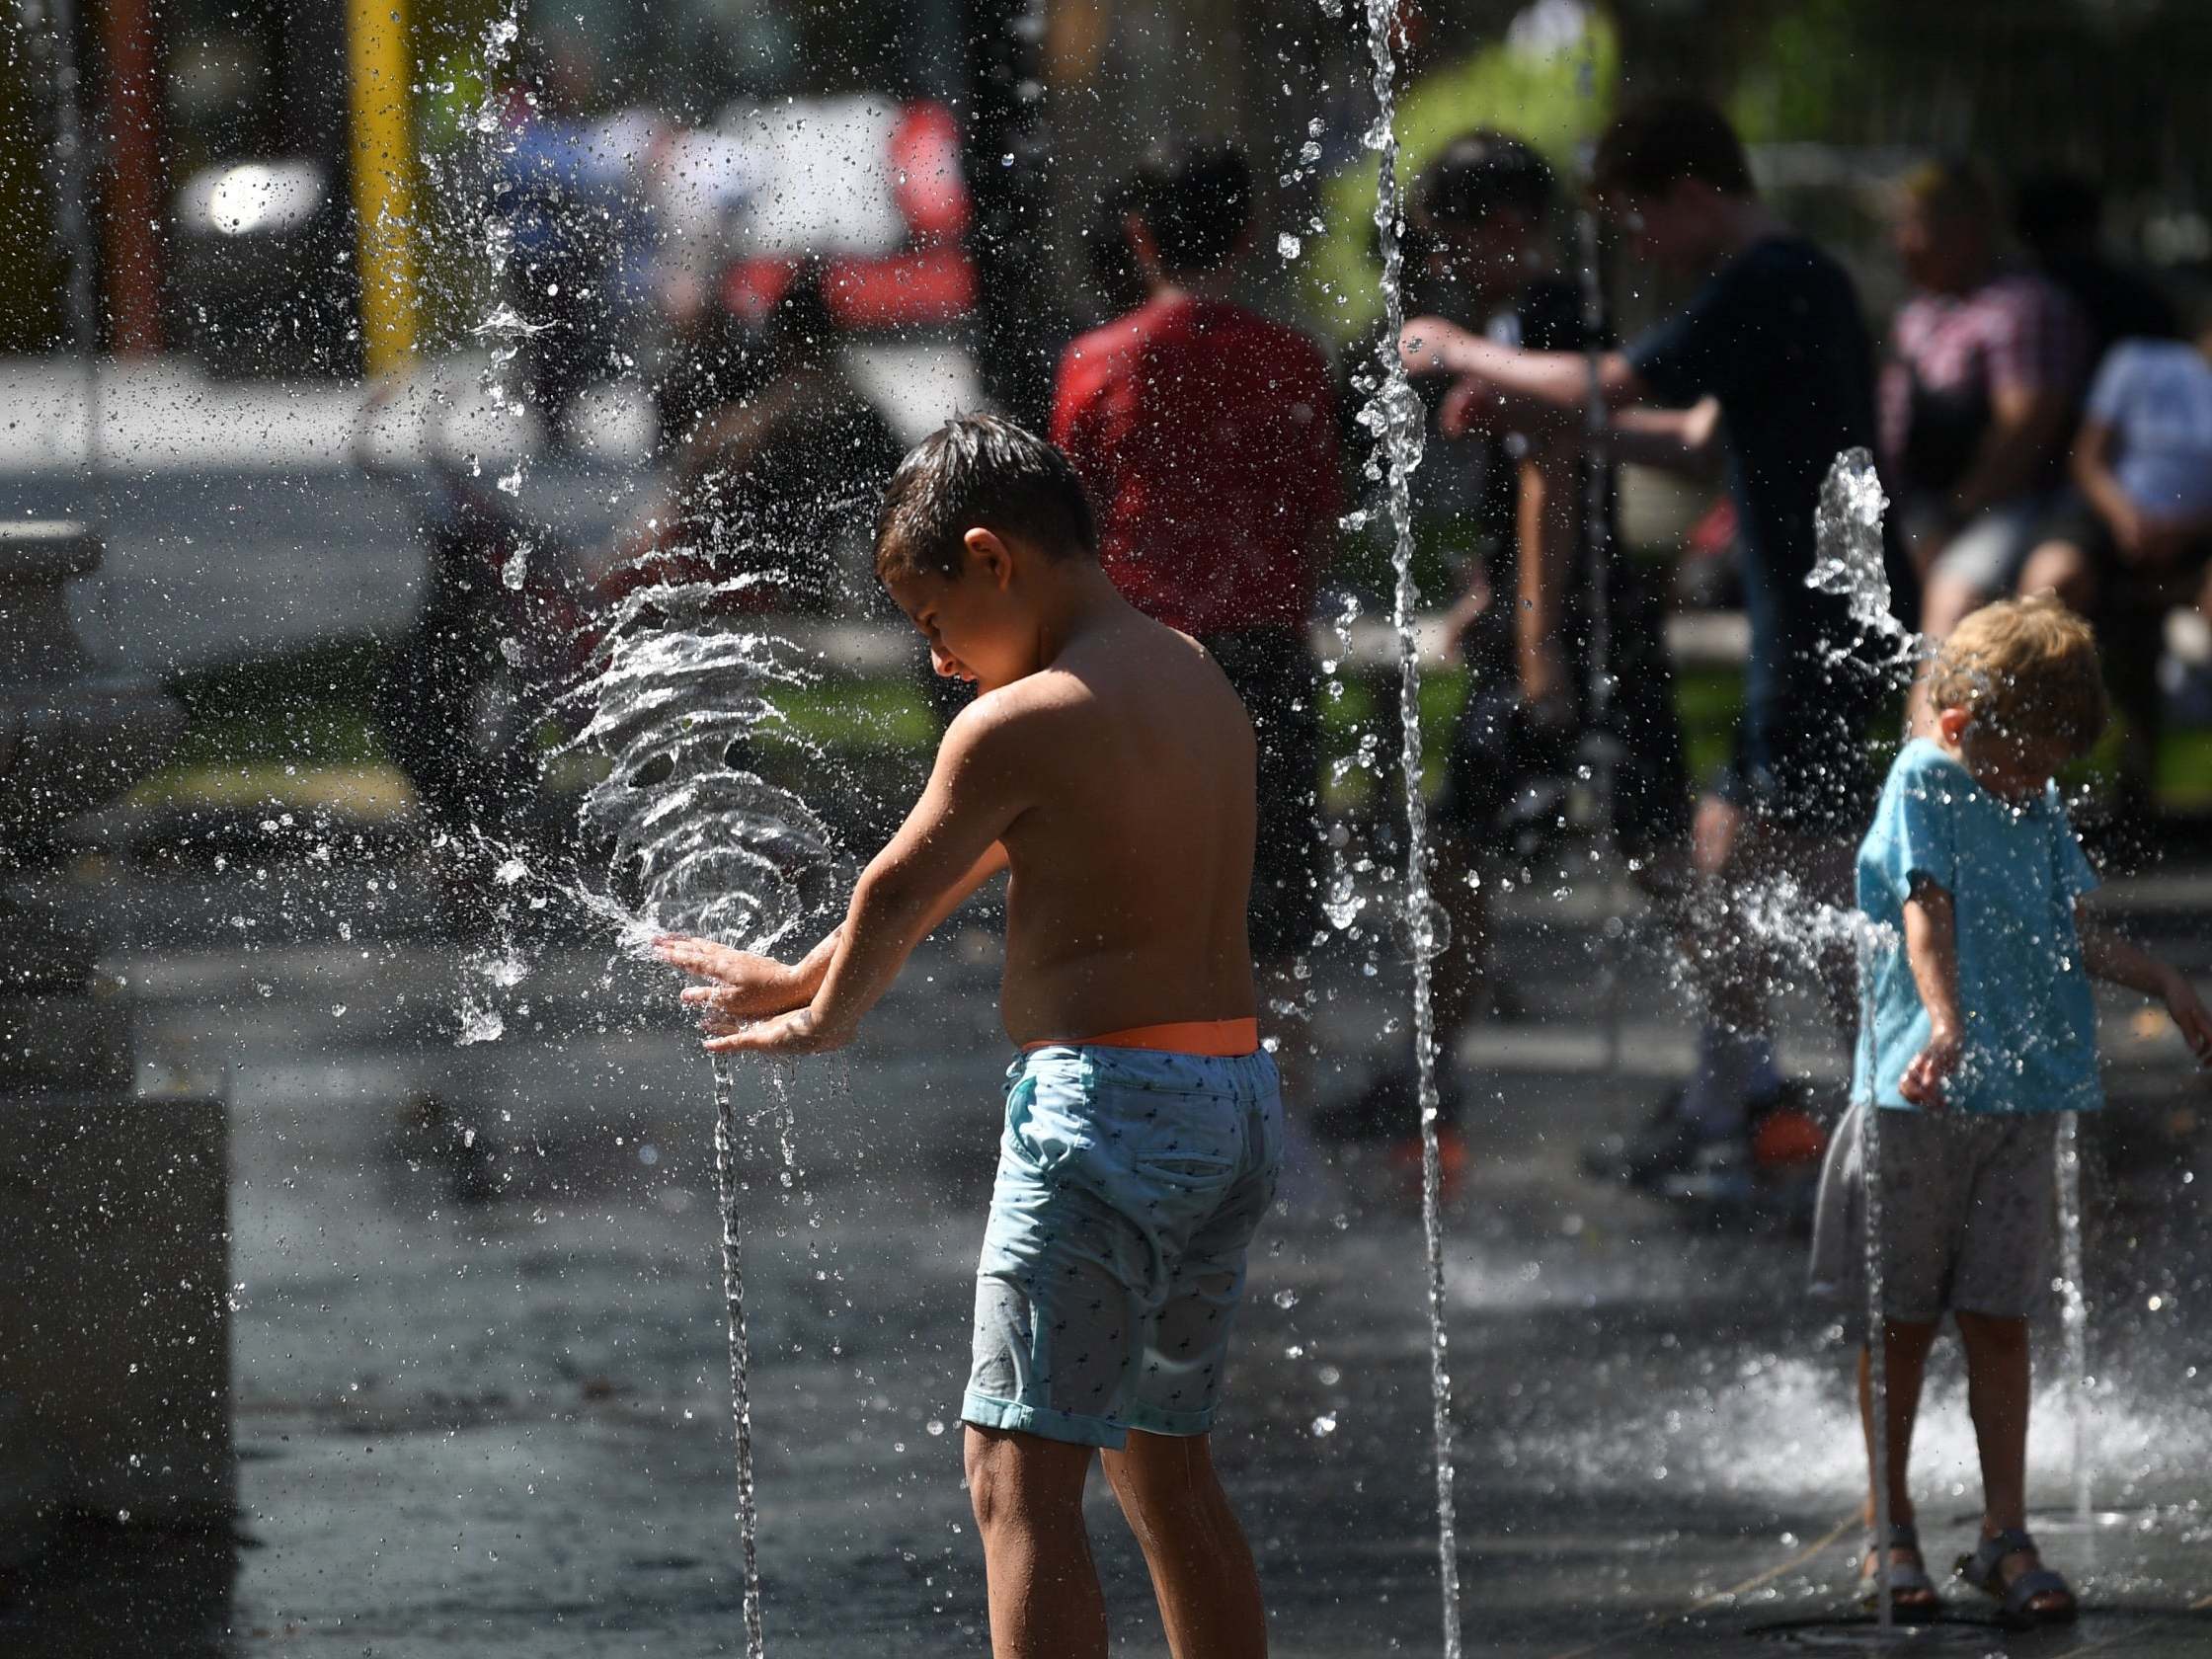 Children cool themselves off in fountains in Leicester Square during a heatwave in London